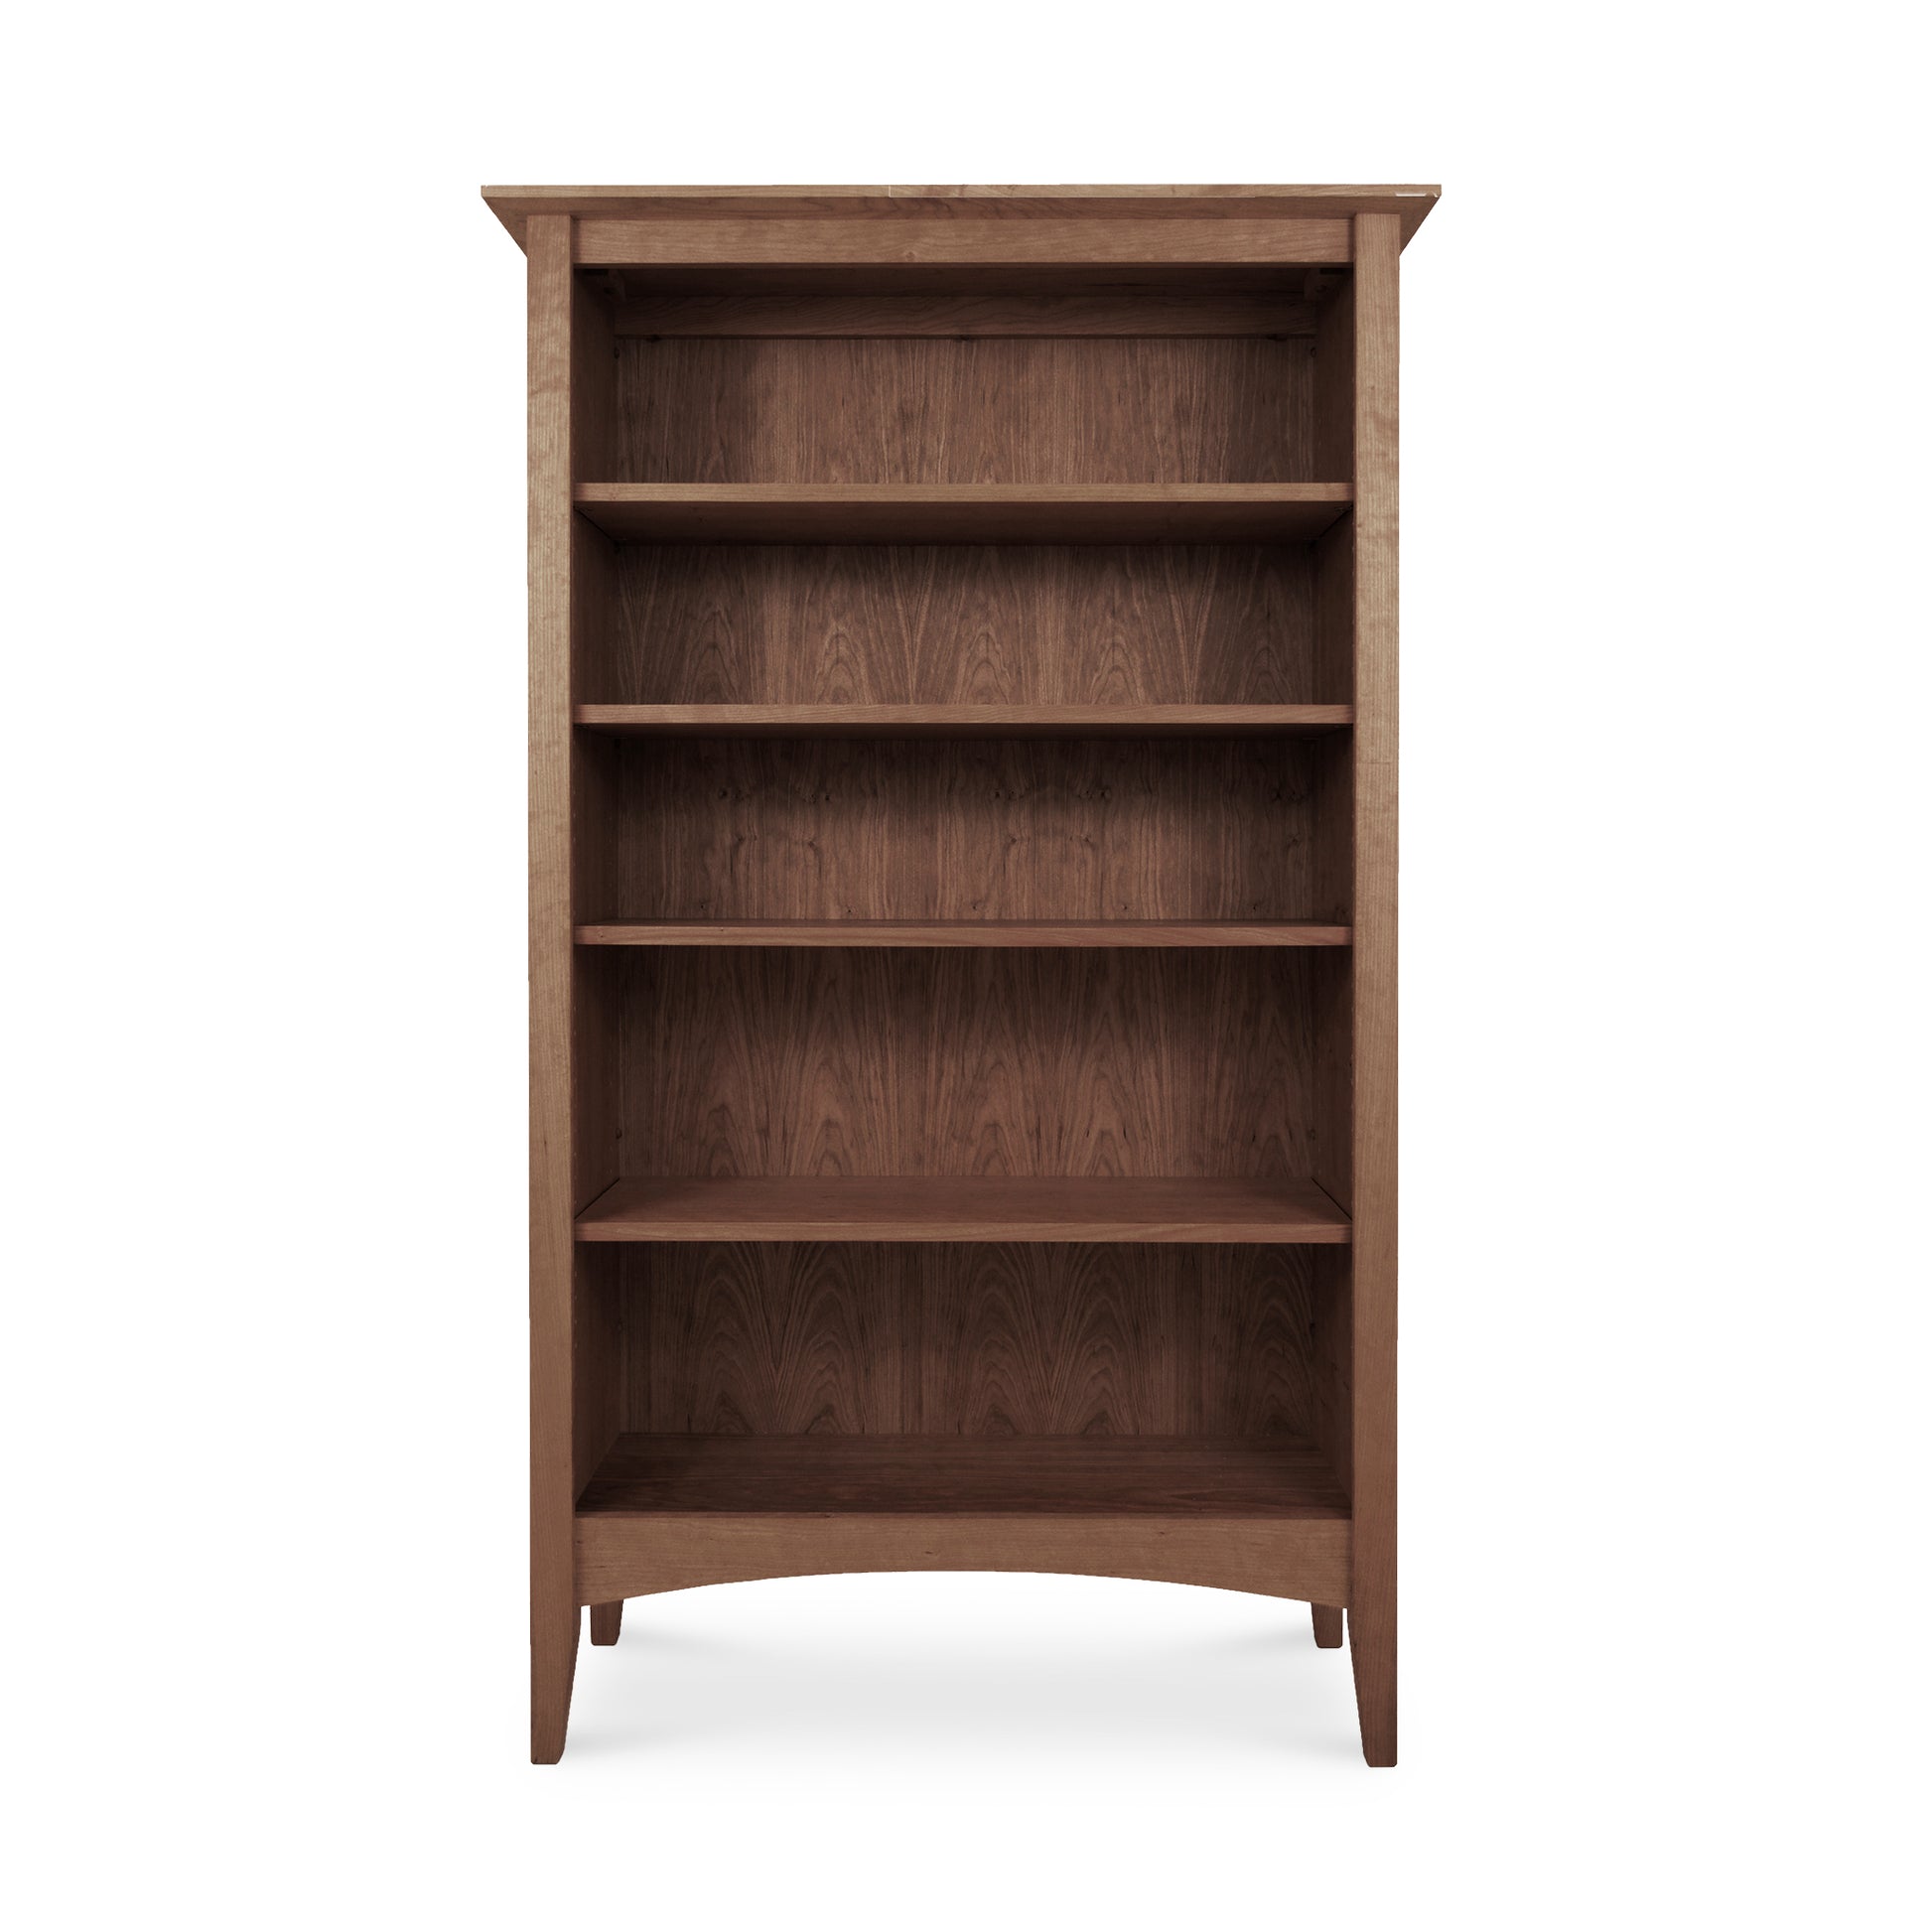 An American Shaker Bookcase made from sustainably harvested hardwoods, placed on a white background by Maple Corner Woodworks.